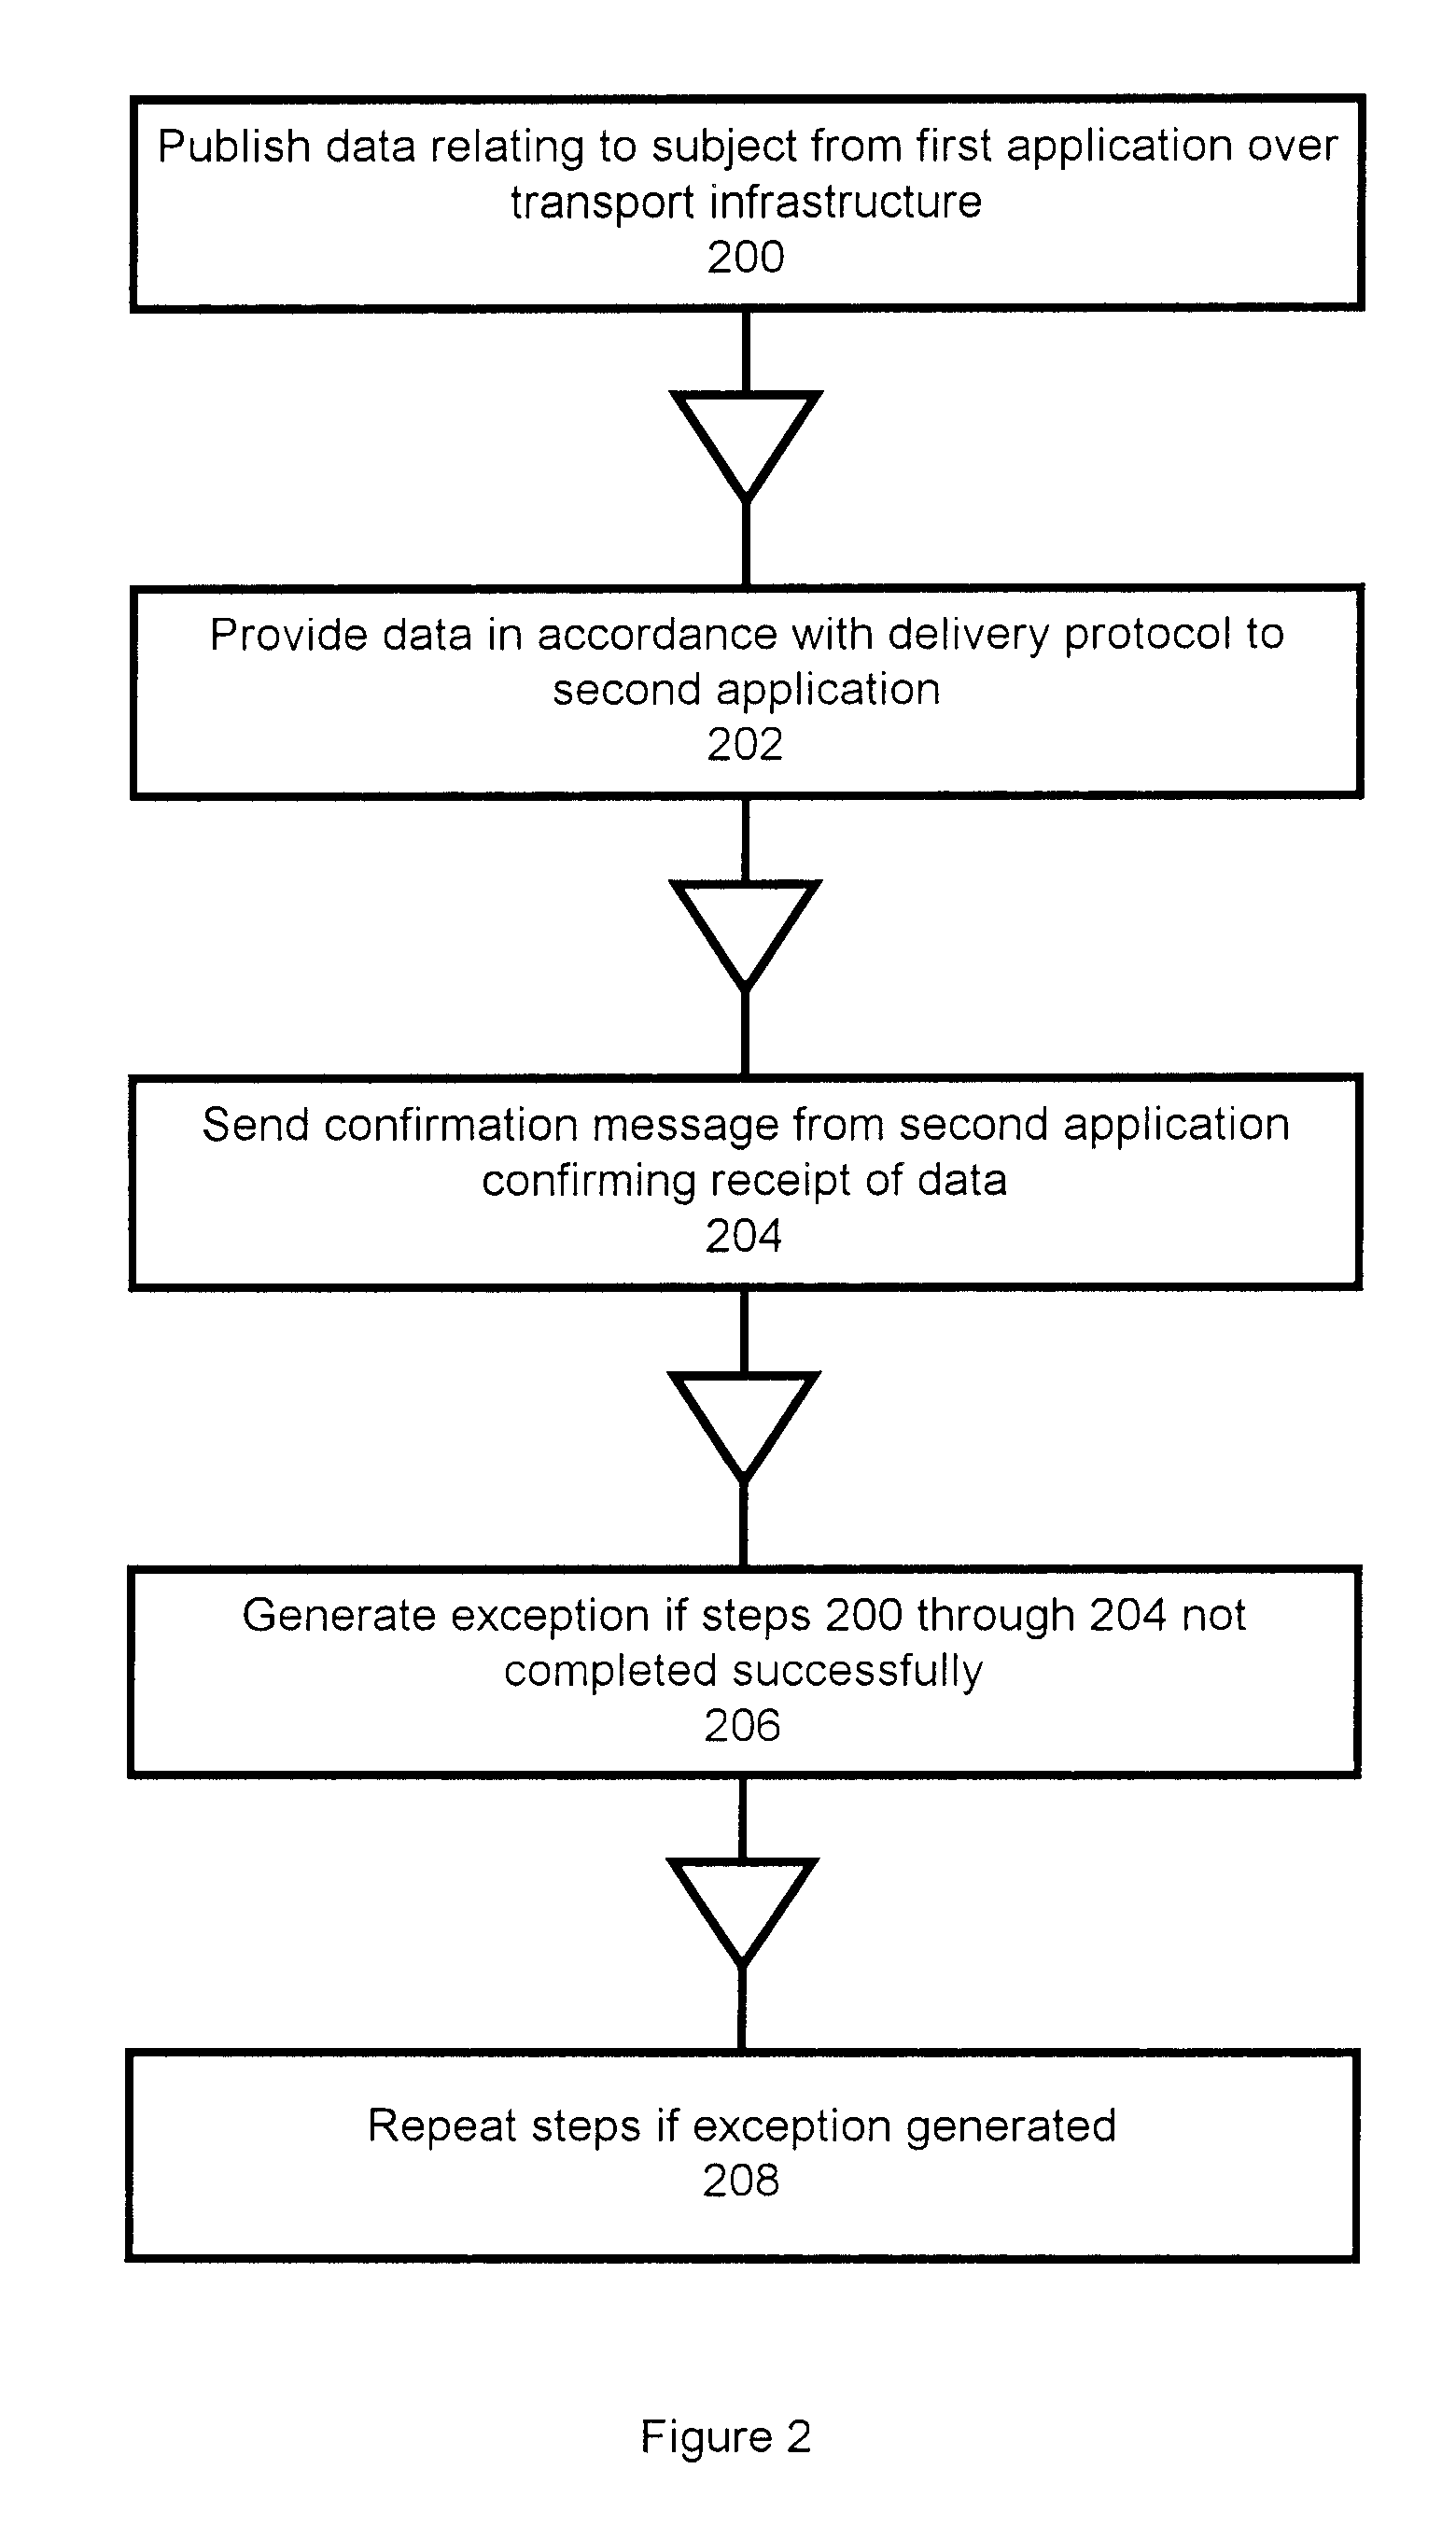 System and Method for Transferring Data Between Applications